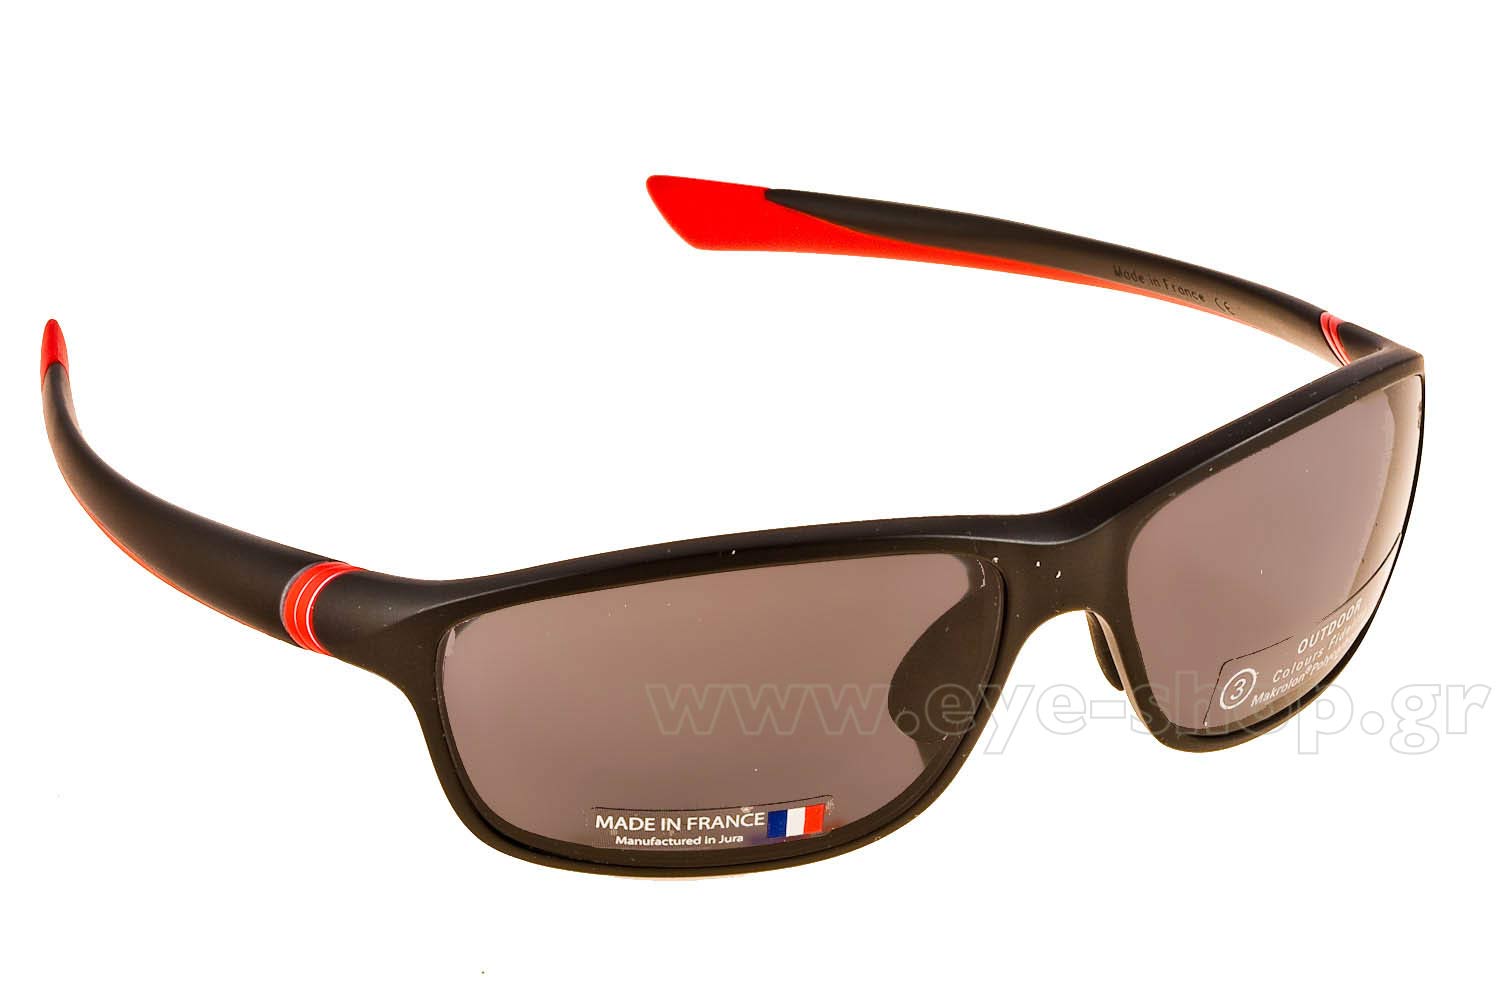 Tag Heuer 27 Degree 6021 102 Matte Black & Red Sports Sunglasses Sonnenbrille